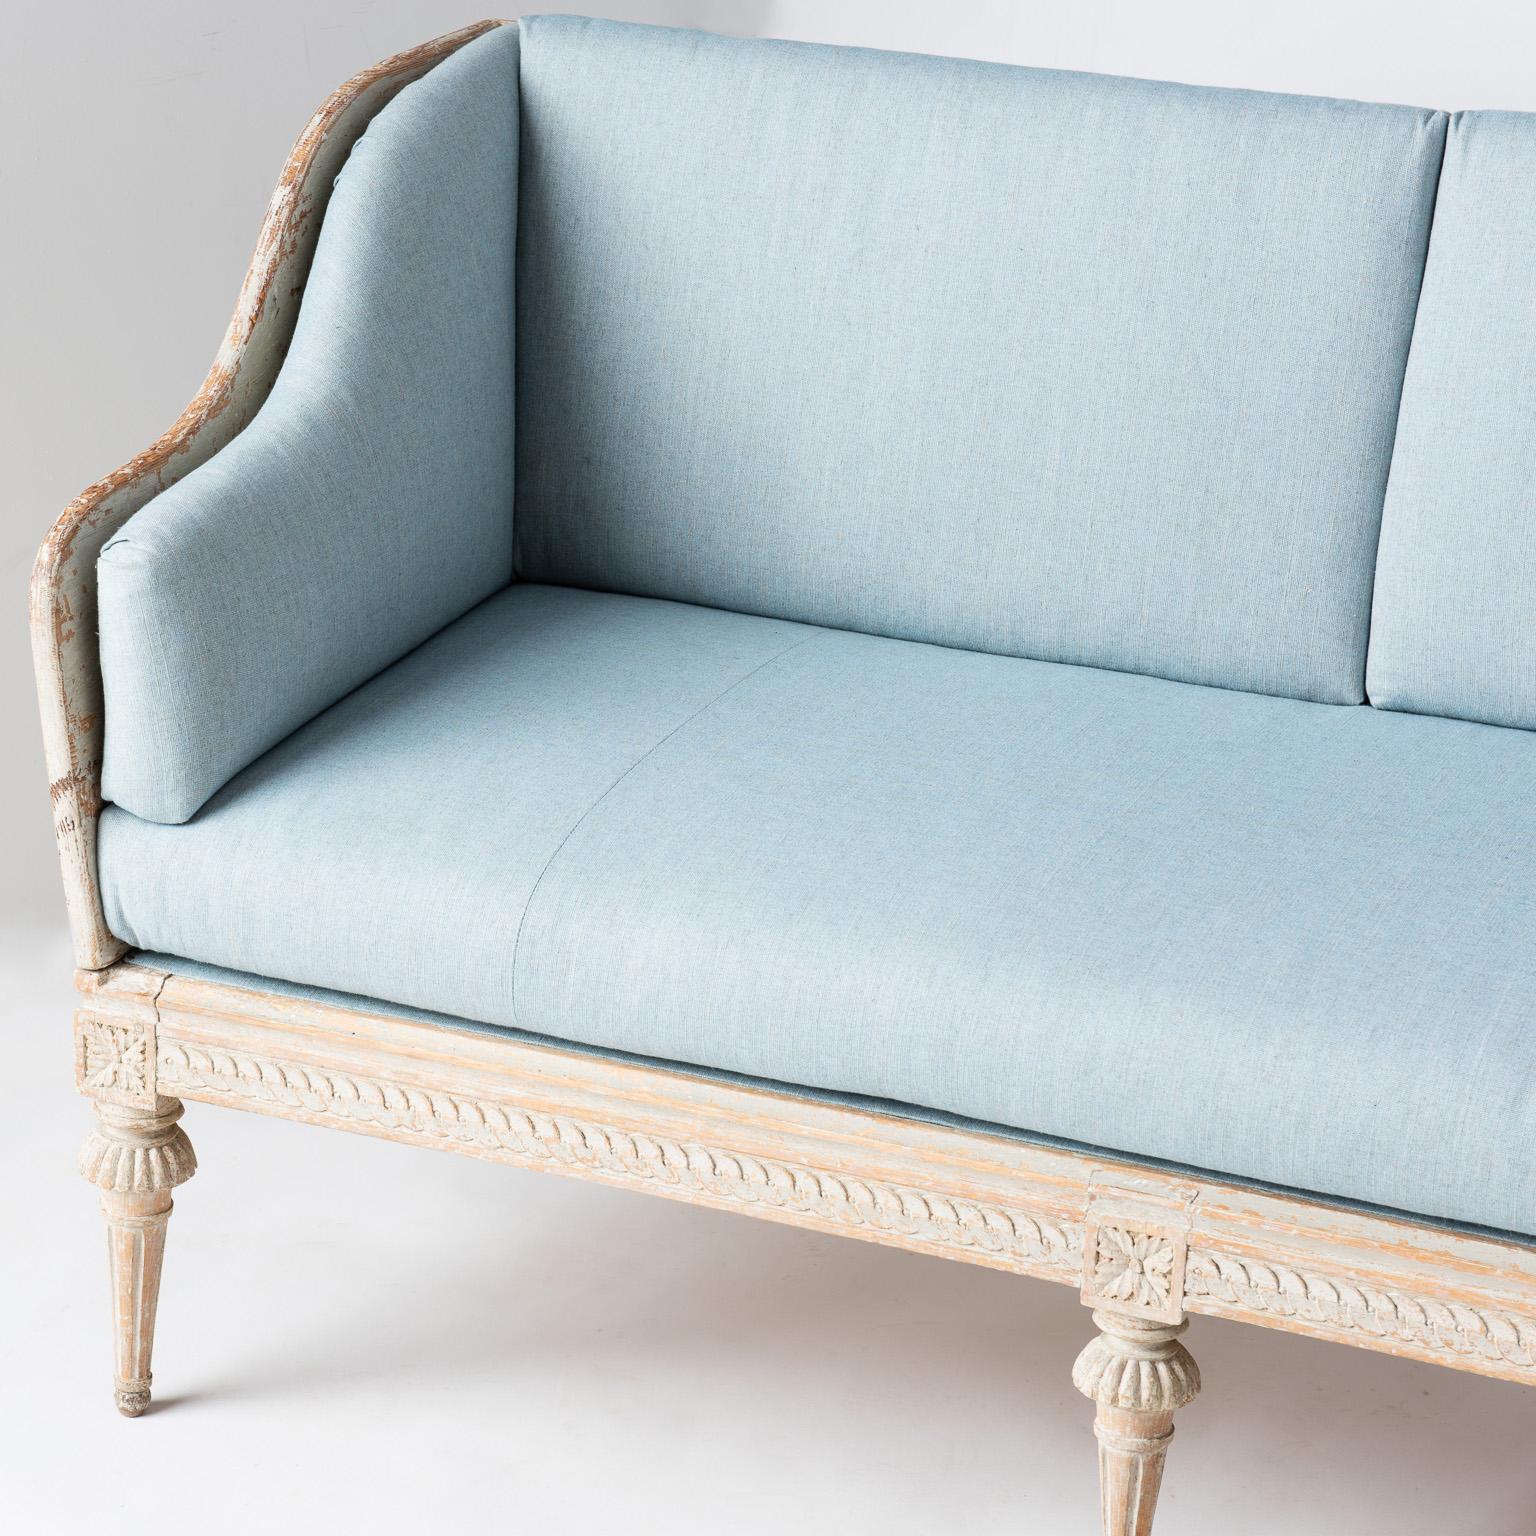 This trågsoffa is a masterwork. Signed by chairmaker Lars Söderholm, an important member of the Stockholm Guild, whose exceptional skill is showcased in this piece. The sofa has carved fleurons on the top of each collared leg, and the apron shows